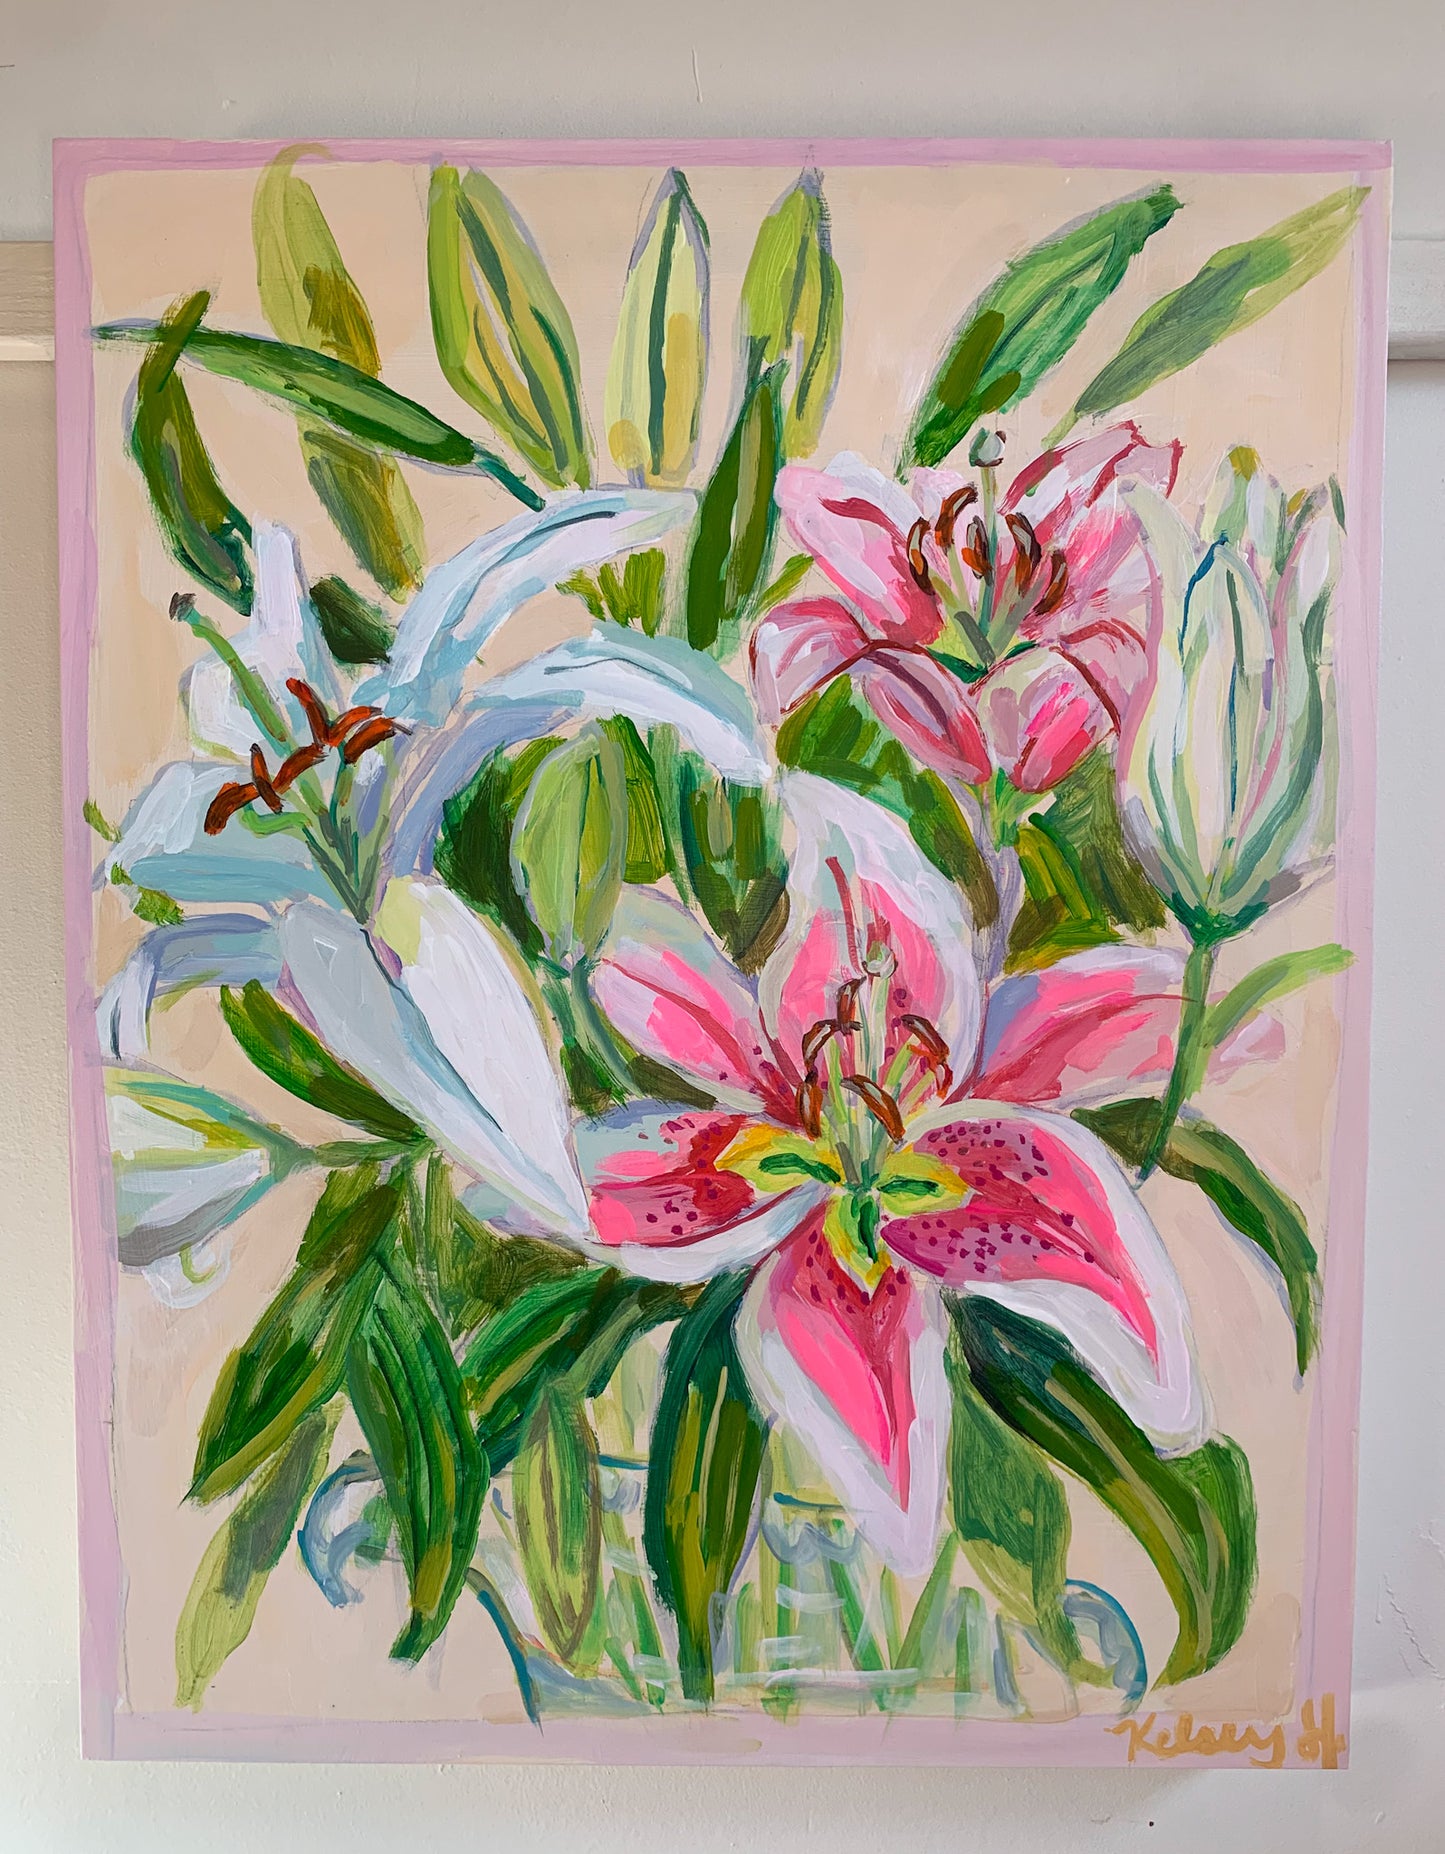 For the Love of Lilies-16x20"